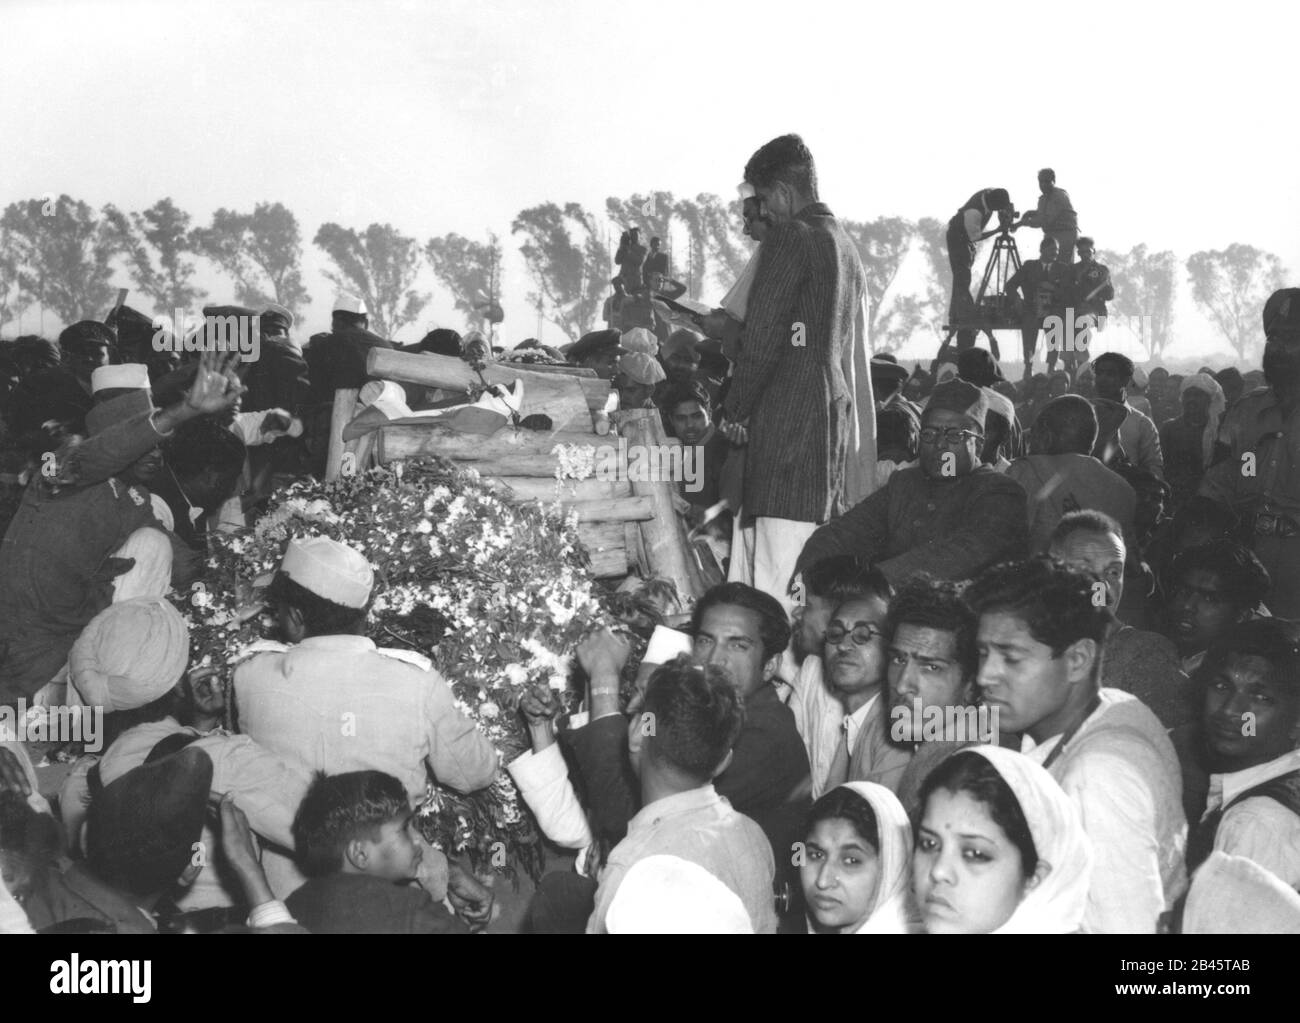 Mahatma Gandhi second youngest son Ramdas lighting cremation funeral pyre, Delhi, India, 31 January 1948, old vintage 1900s picture Stock Photo